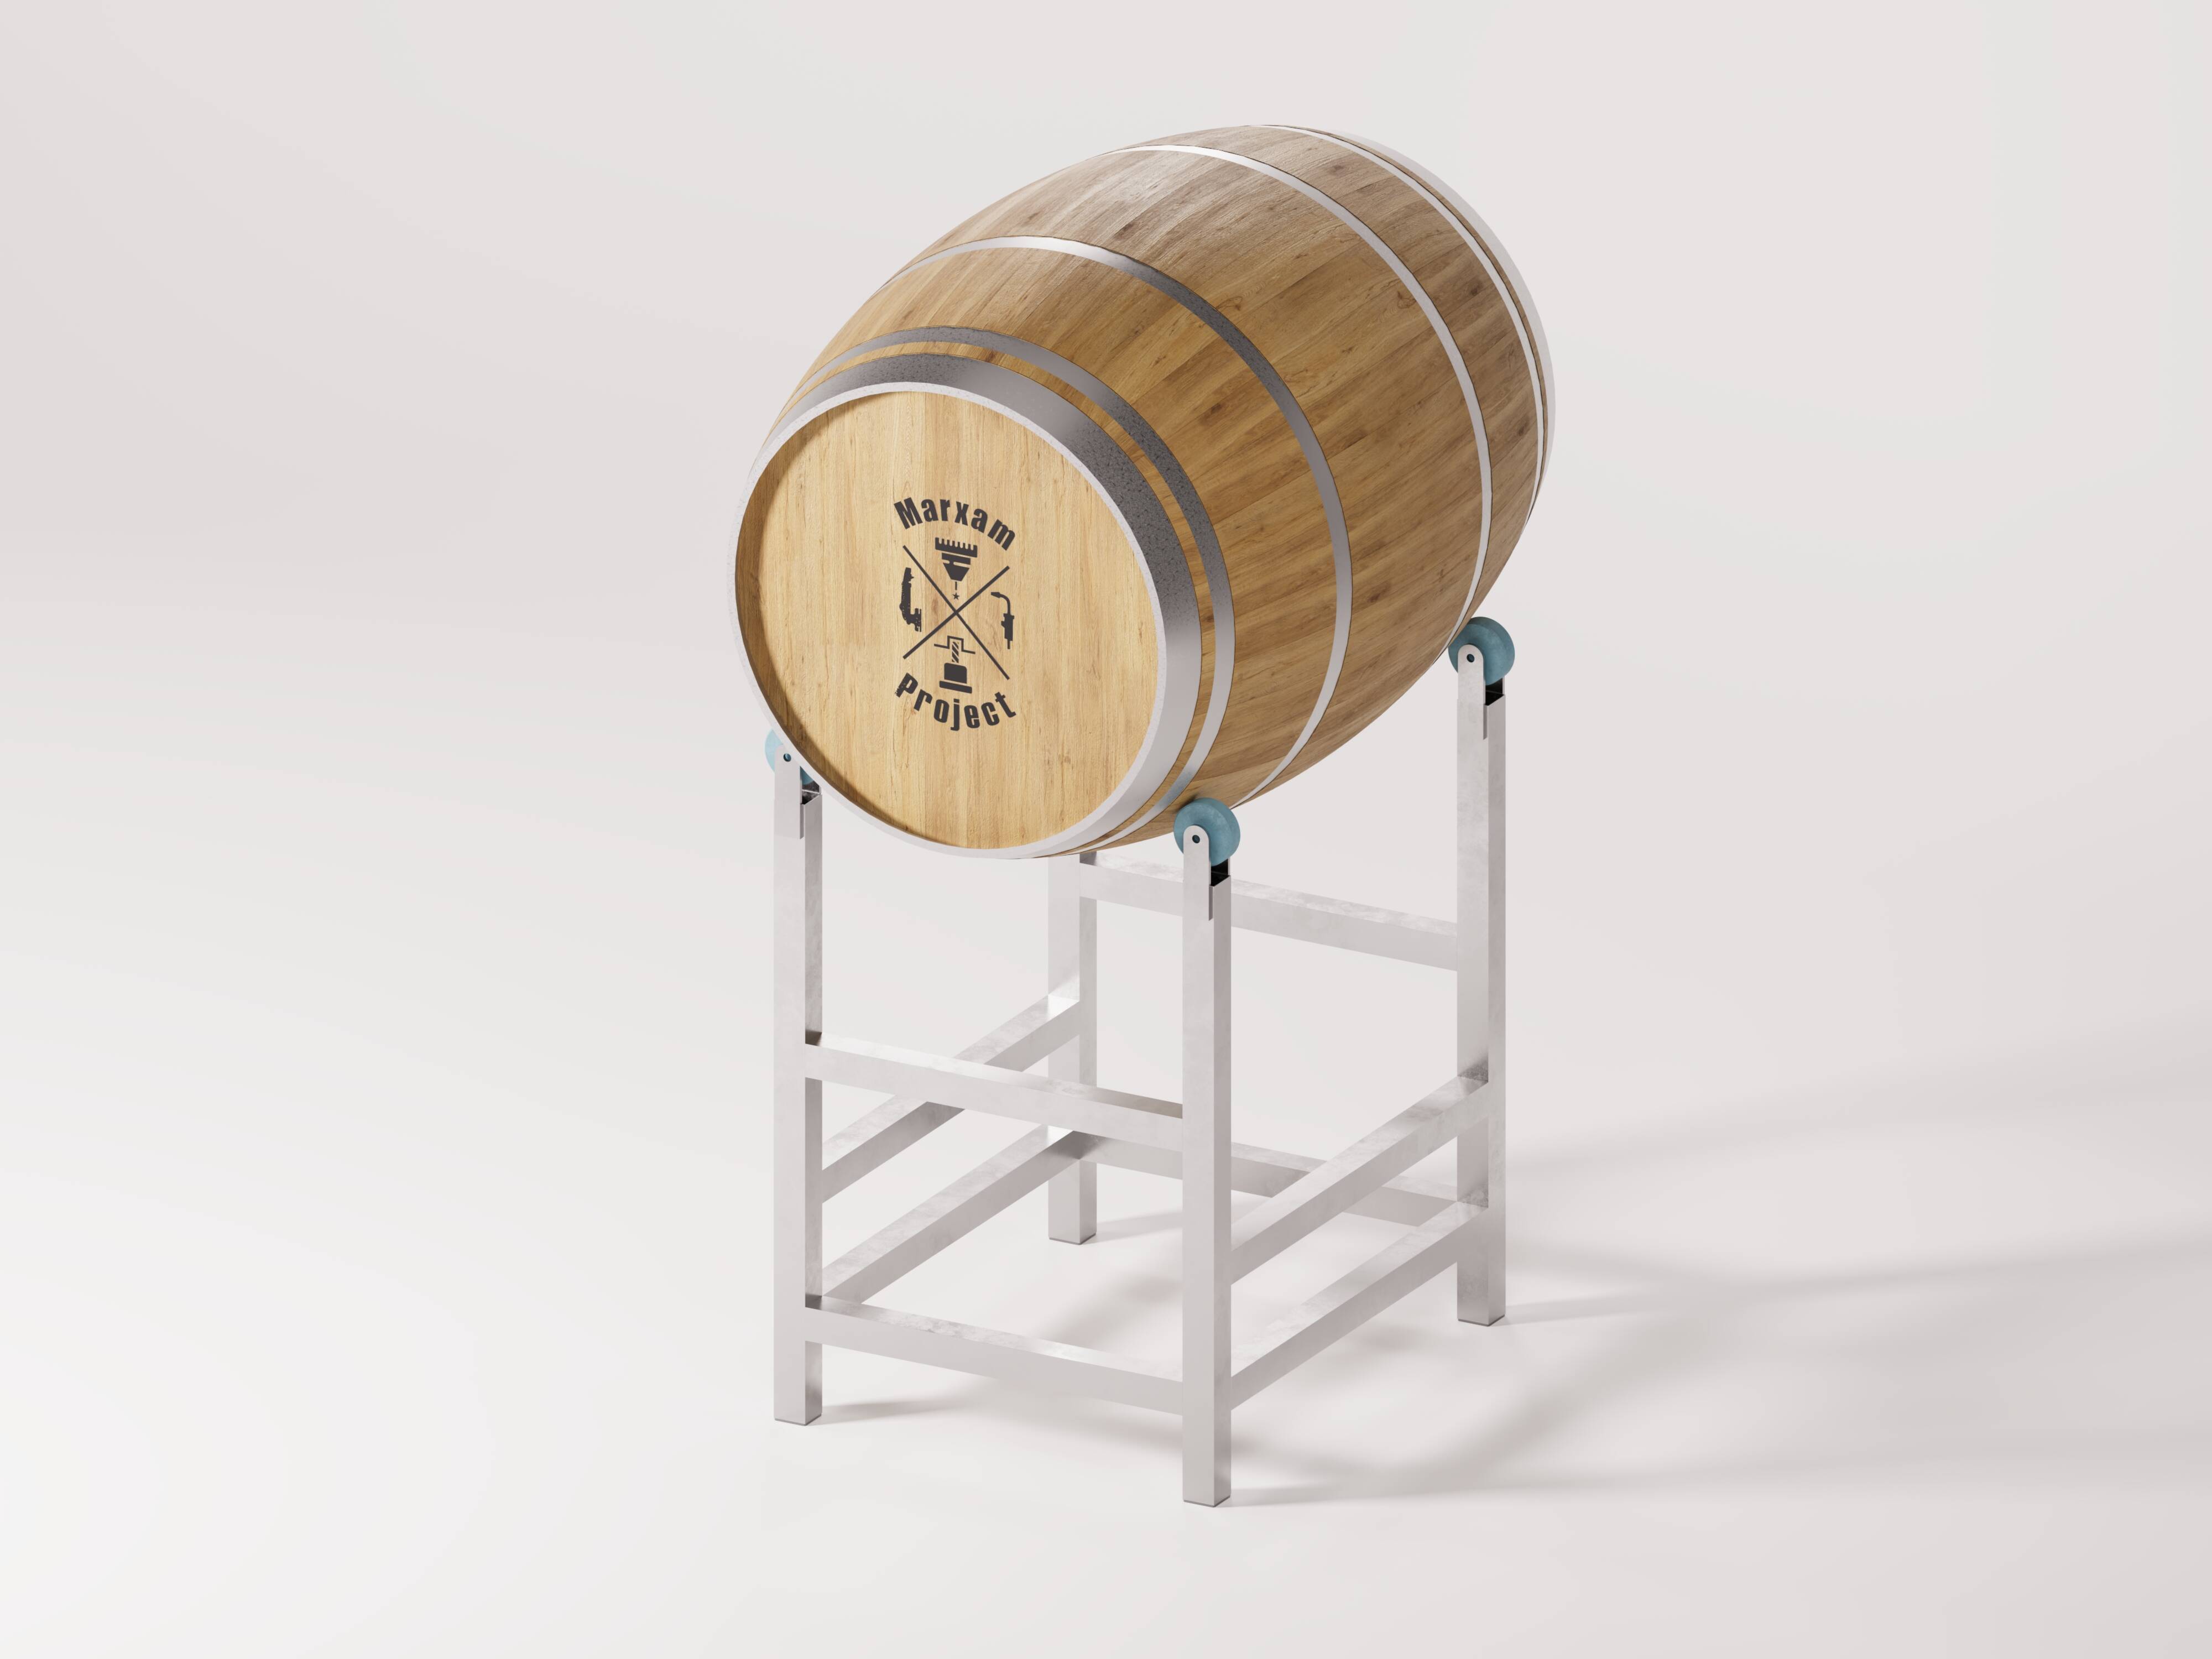 The picture depicts a rotating barrel cradle firmly holding a single barrel. The barrel is visibly in good condition and securely fastened.